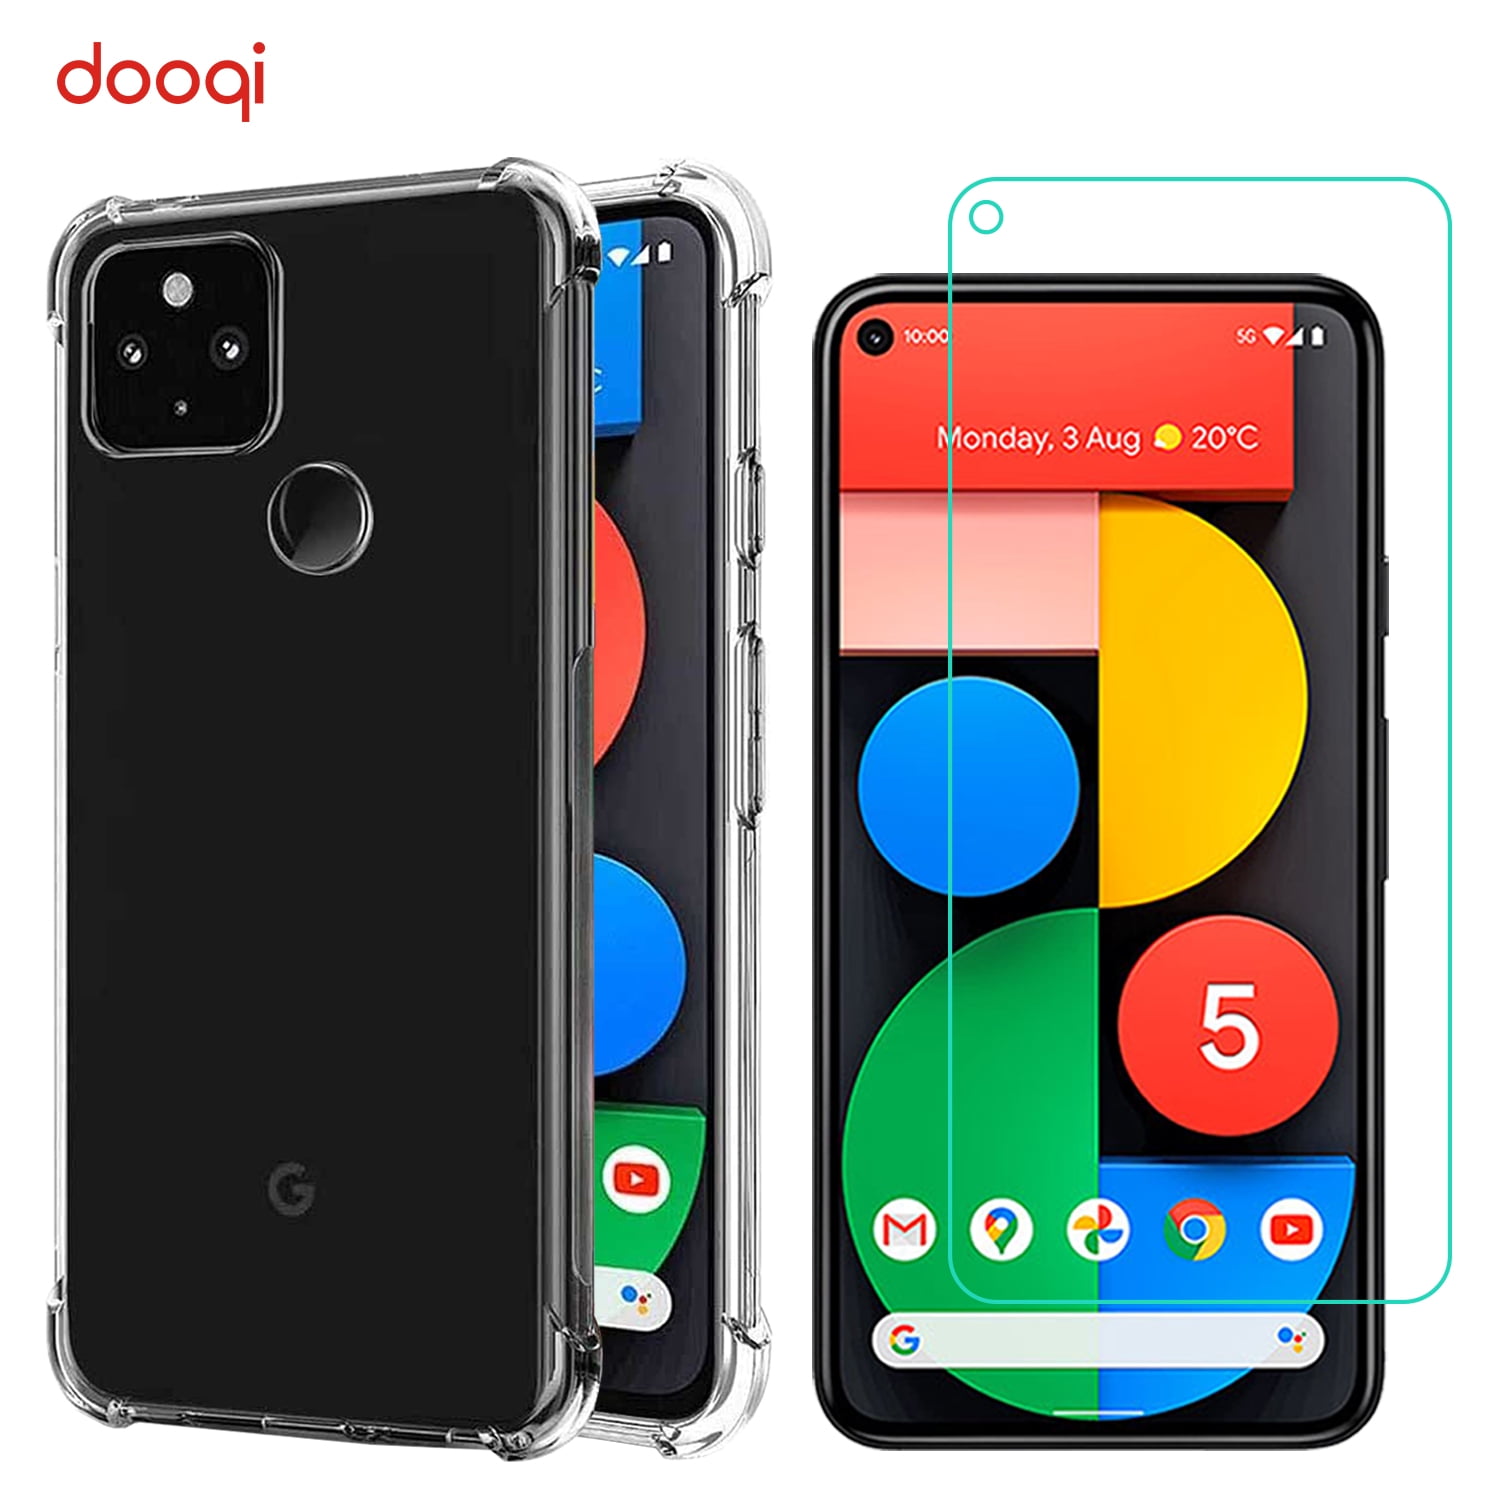 Dooqi Premium Ultra Clear Tempered Glass Screen Protector for Google Pixel 2 